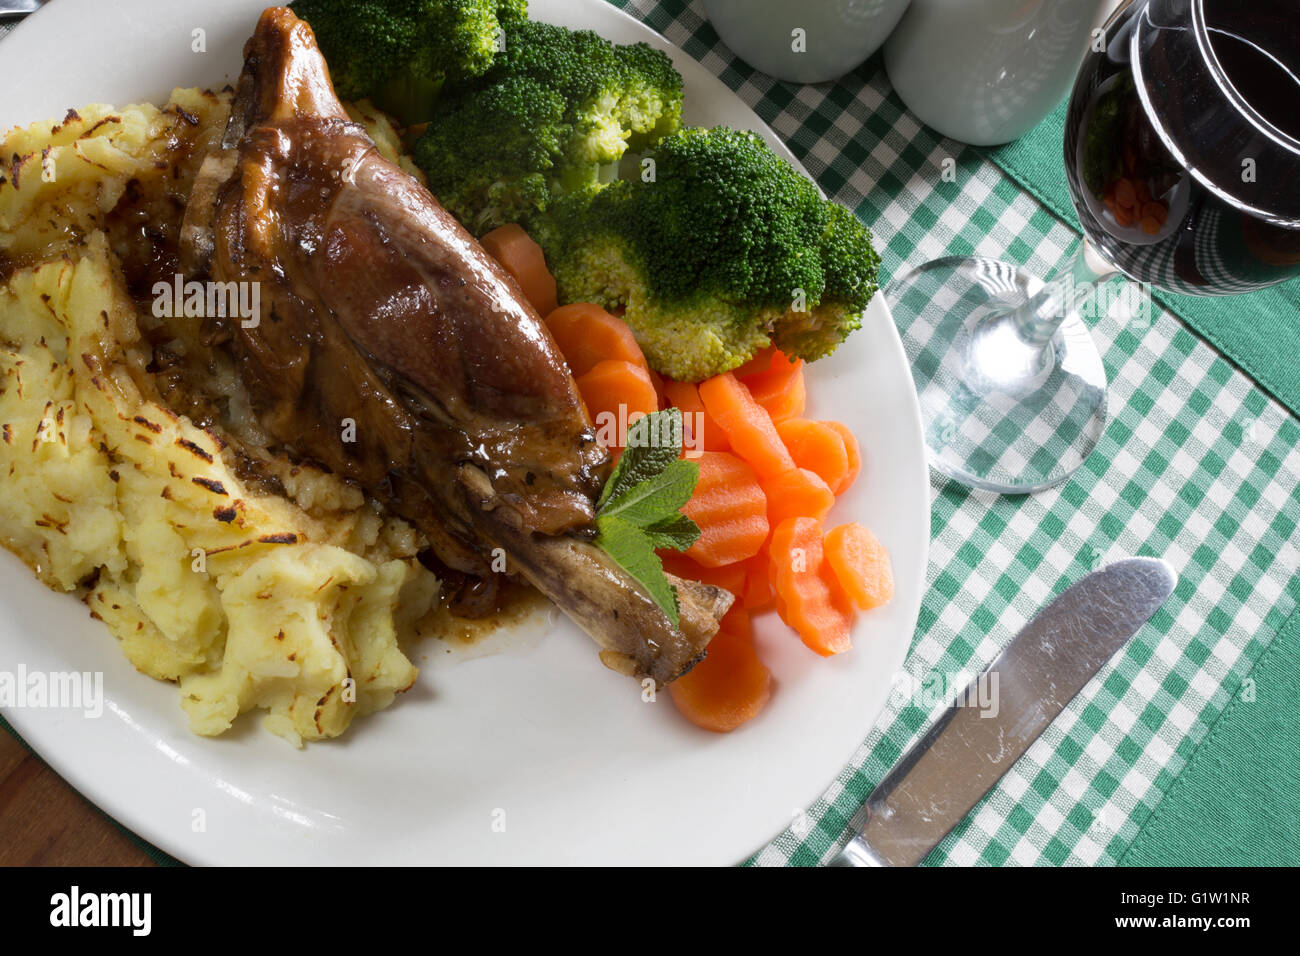 A serving of Lamb Shank with Mint gravy and Mashed Potato. Served with Vichy Carrots and Broccoli florets, Stock Photo